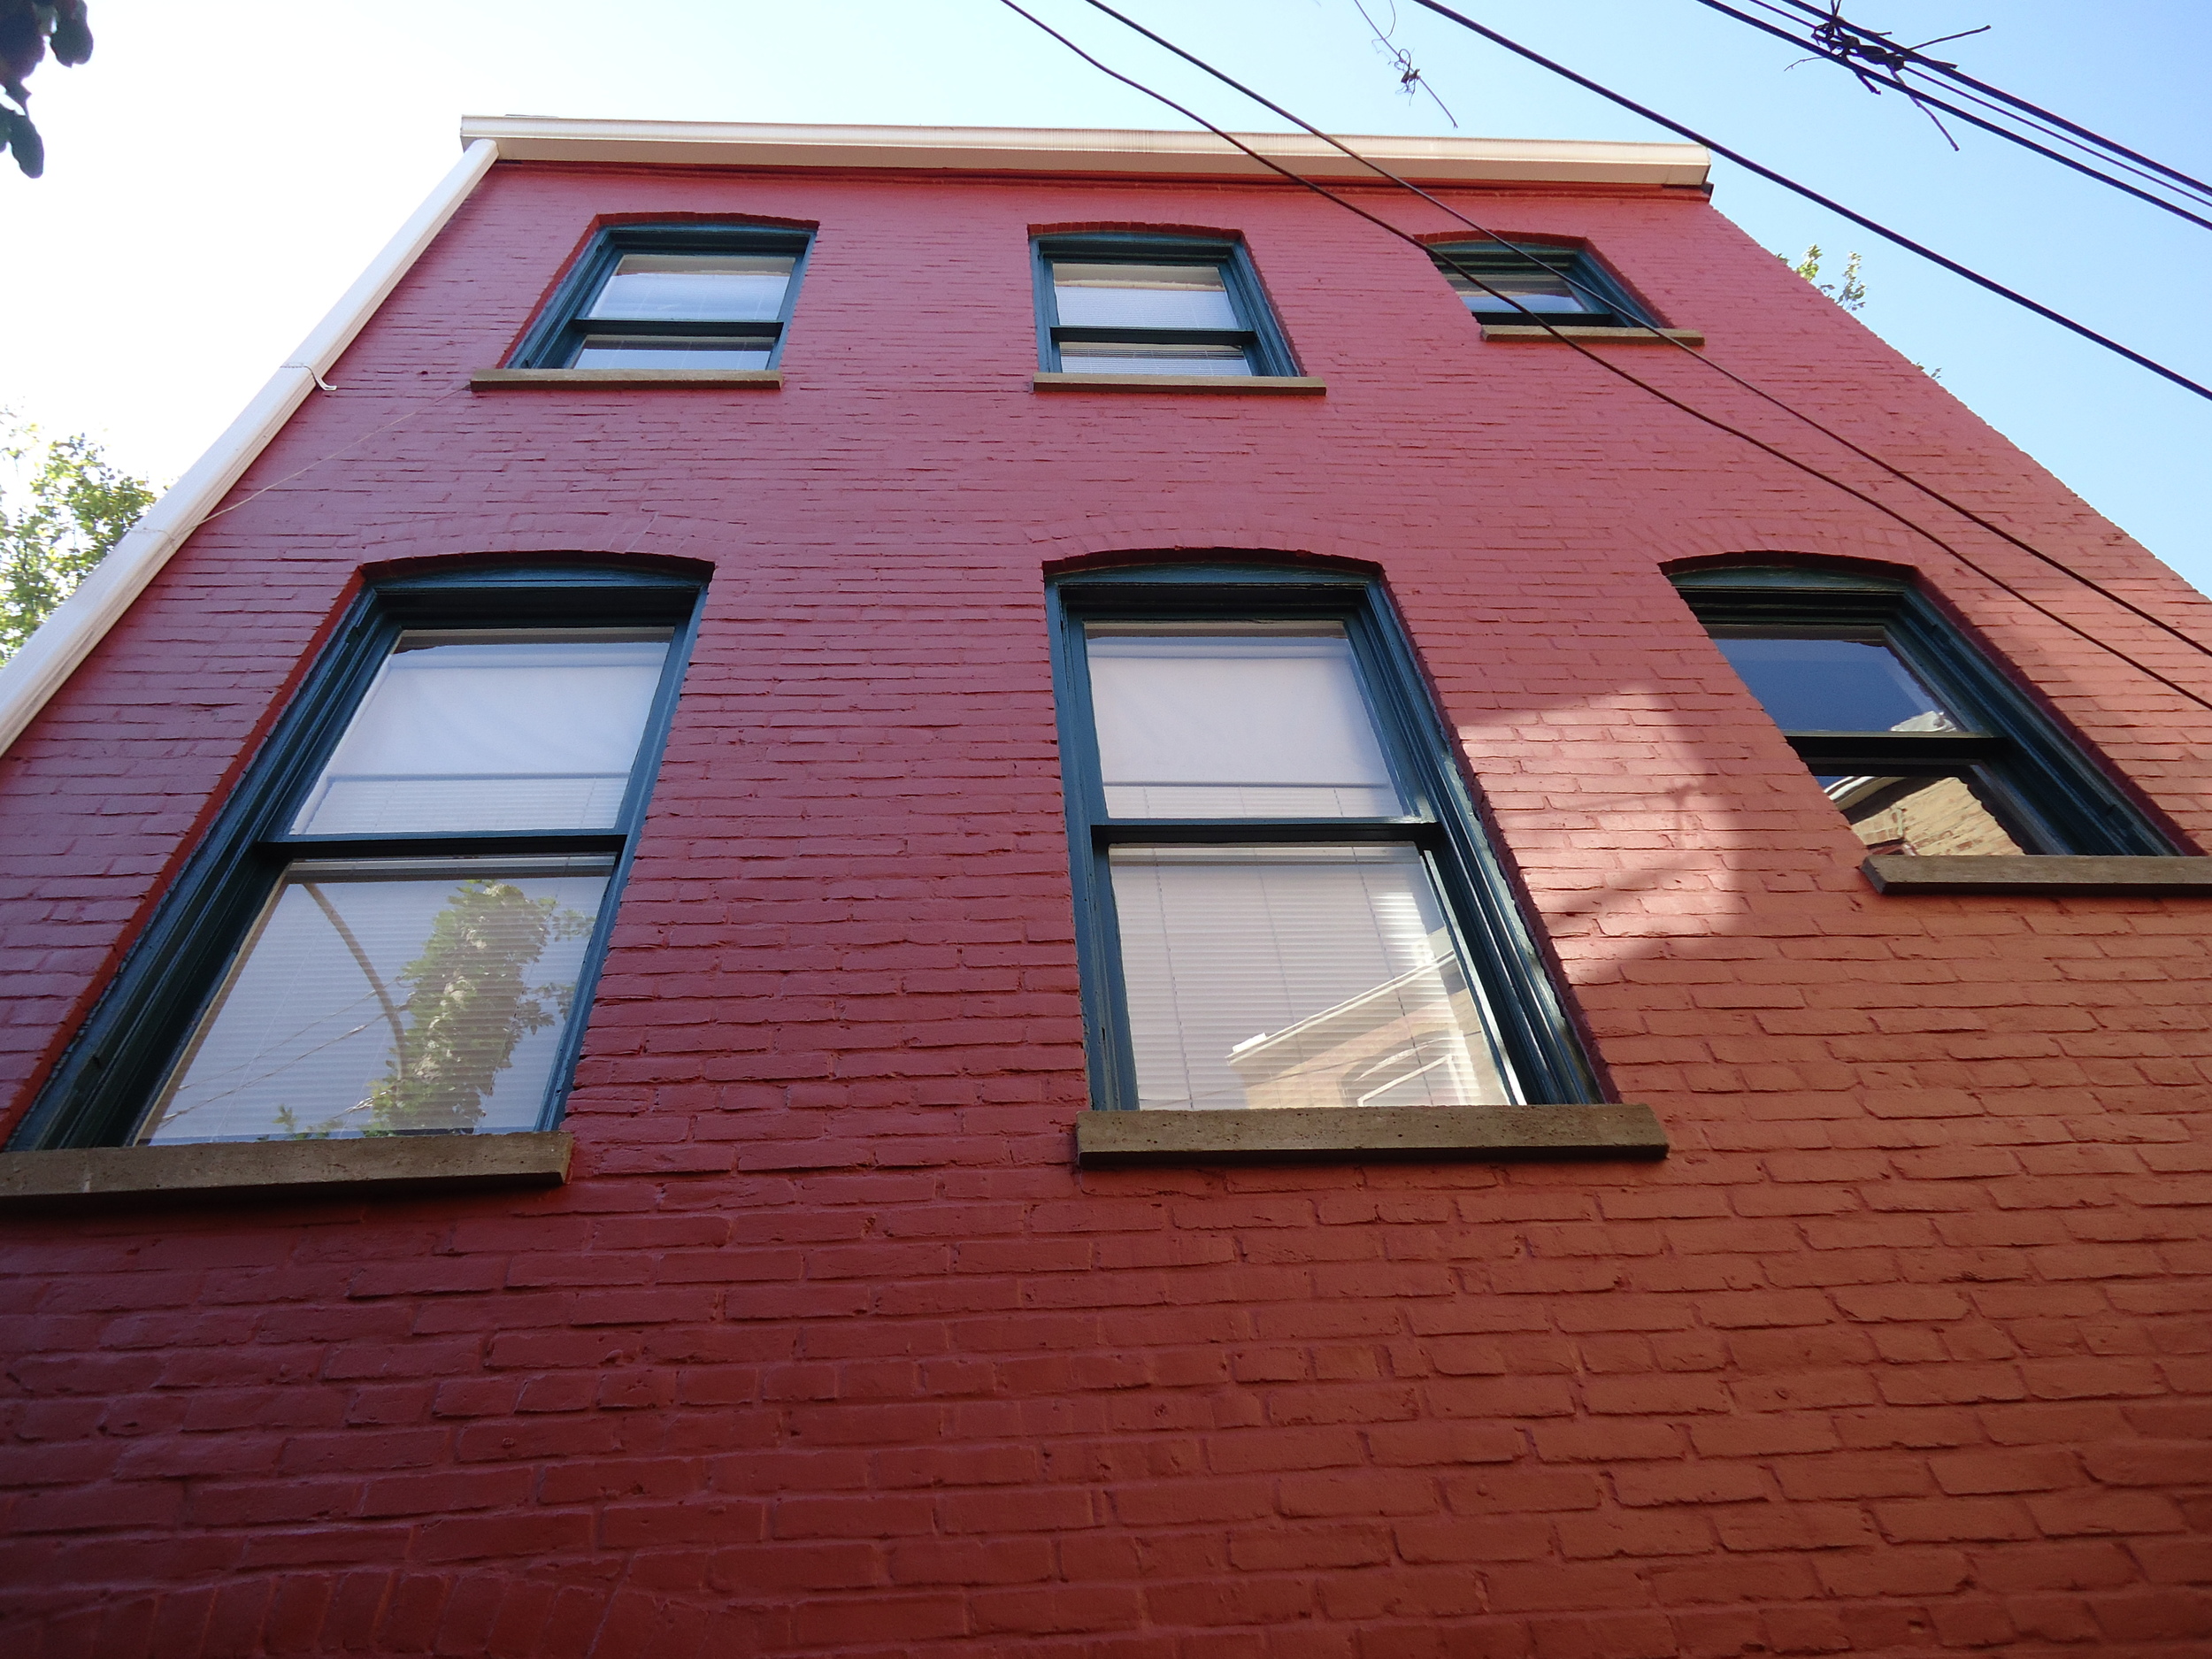  Painted Exterior Brick Walls and Refinished Windows 